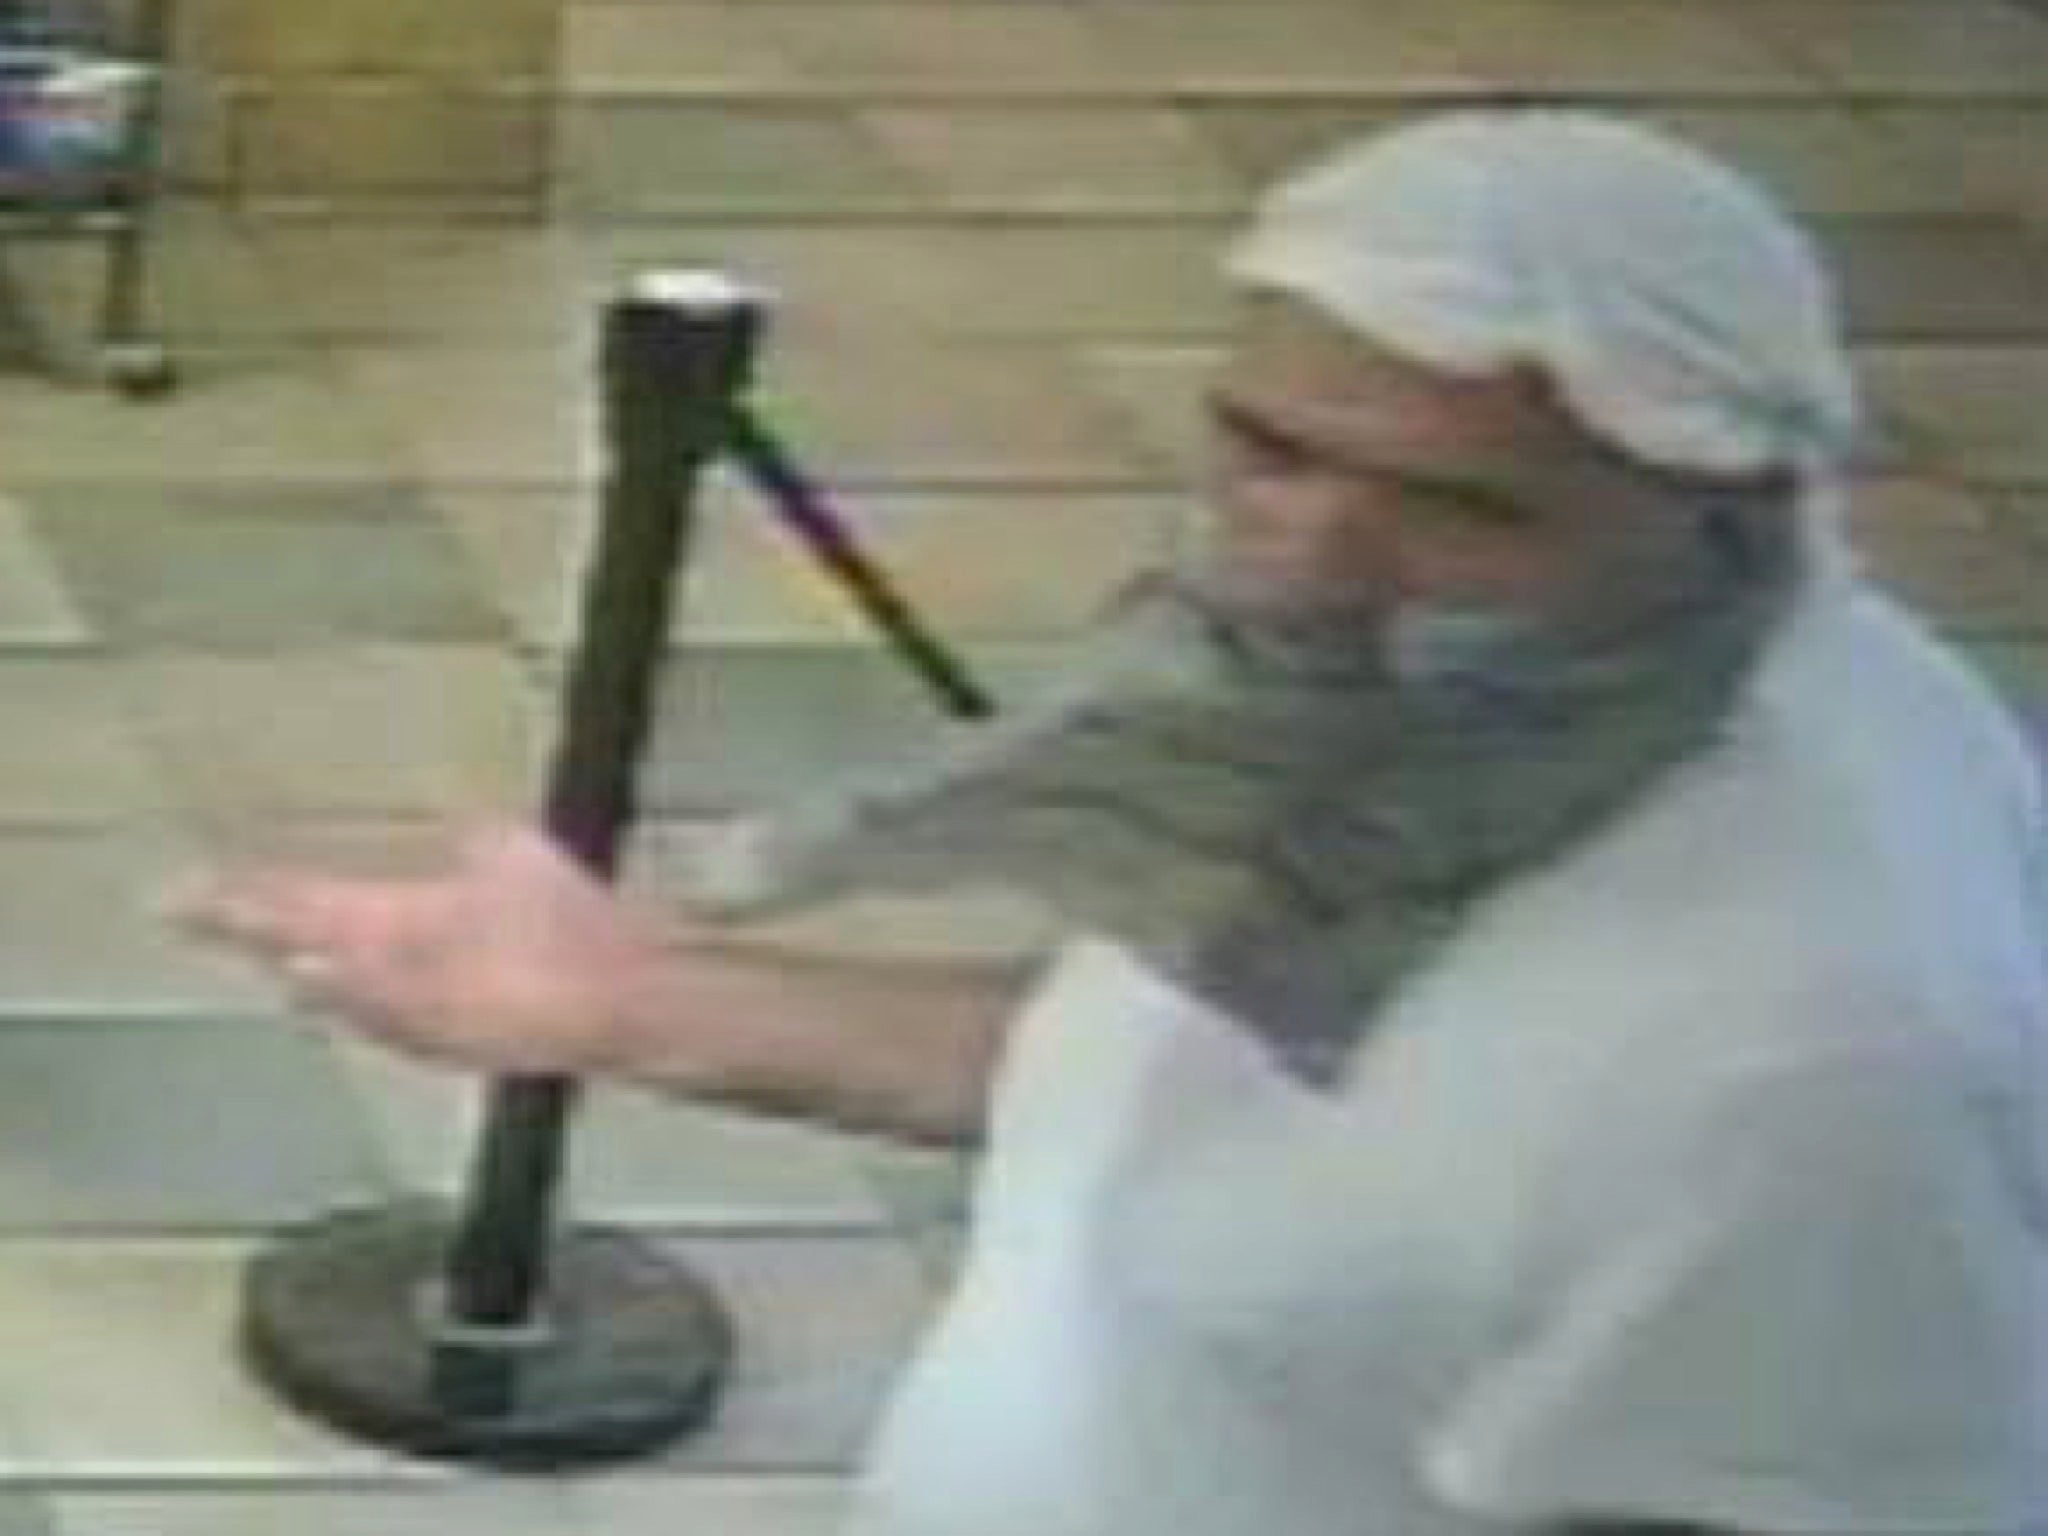 Police are searching for this man who tried to rob a Subway sandwich shop